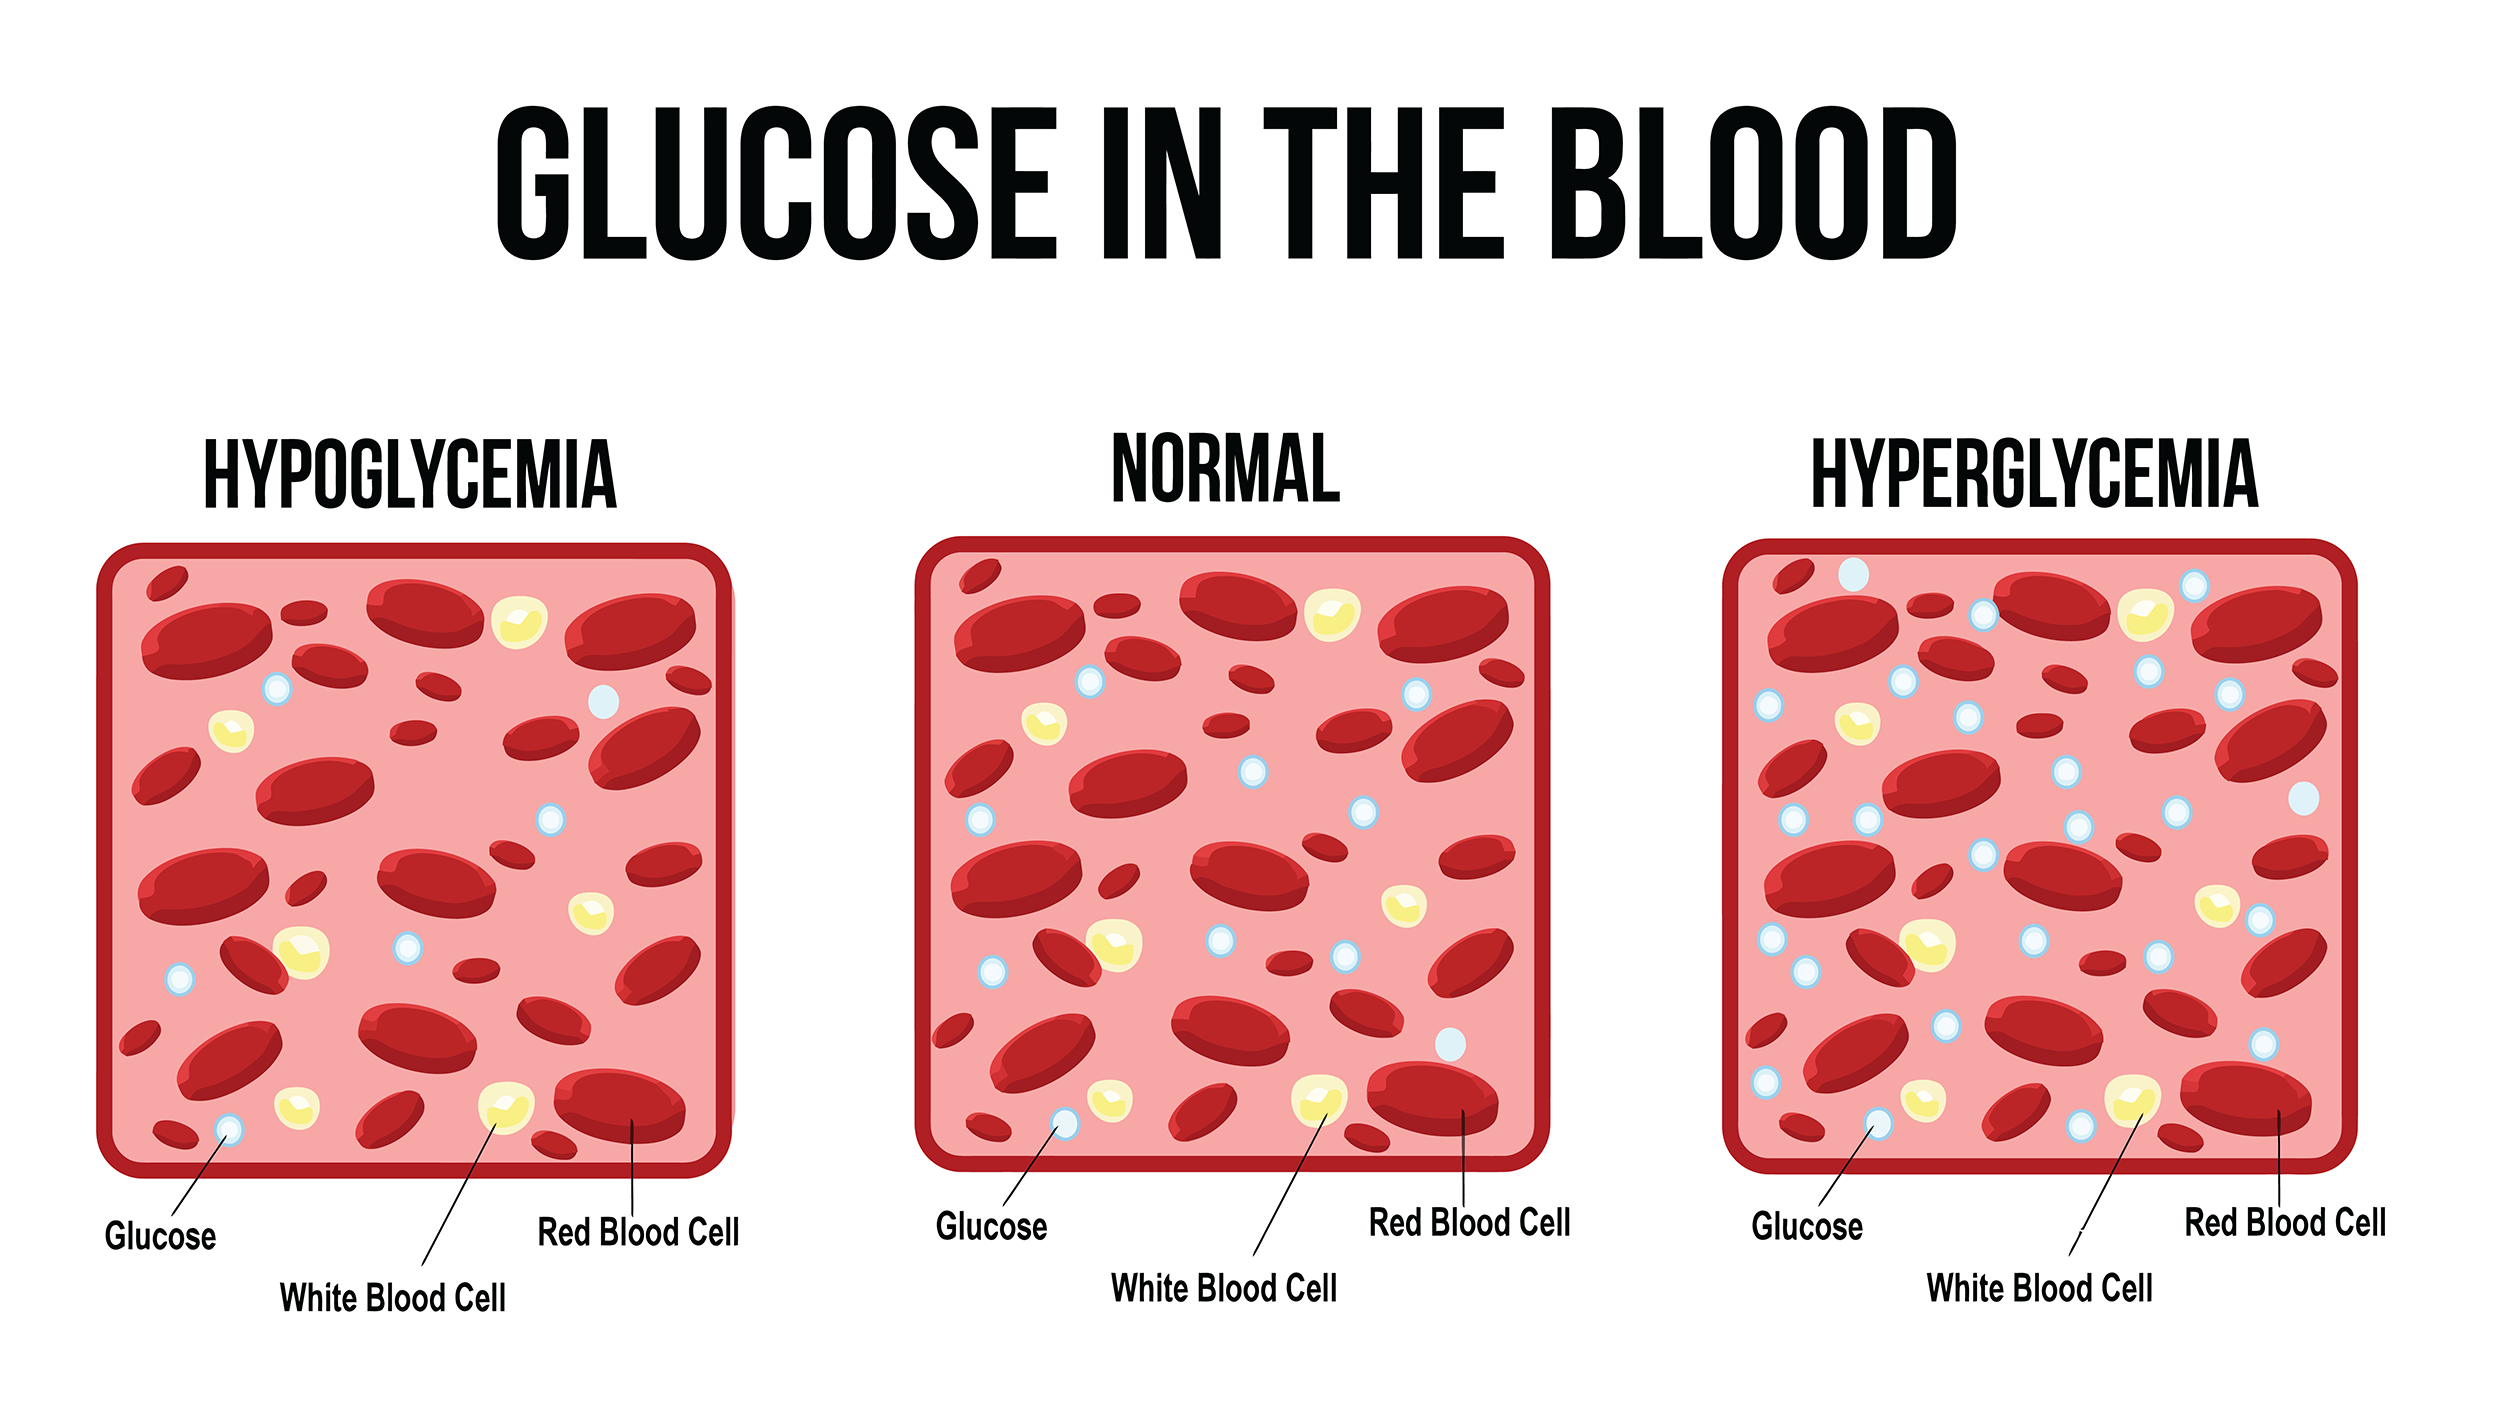 What is Hyperglycemia?